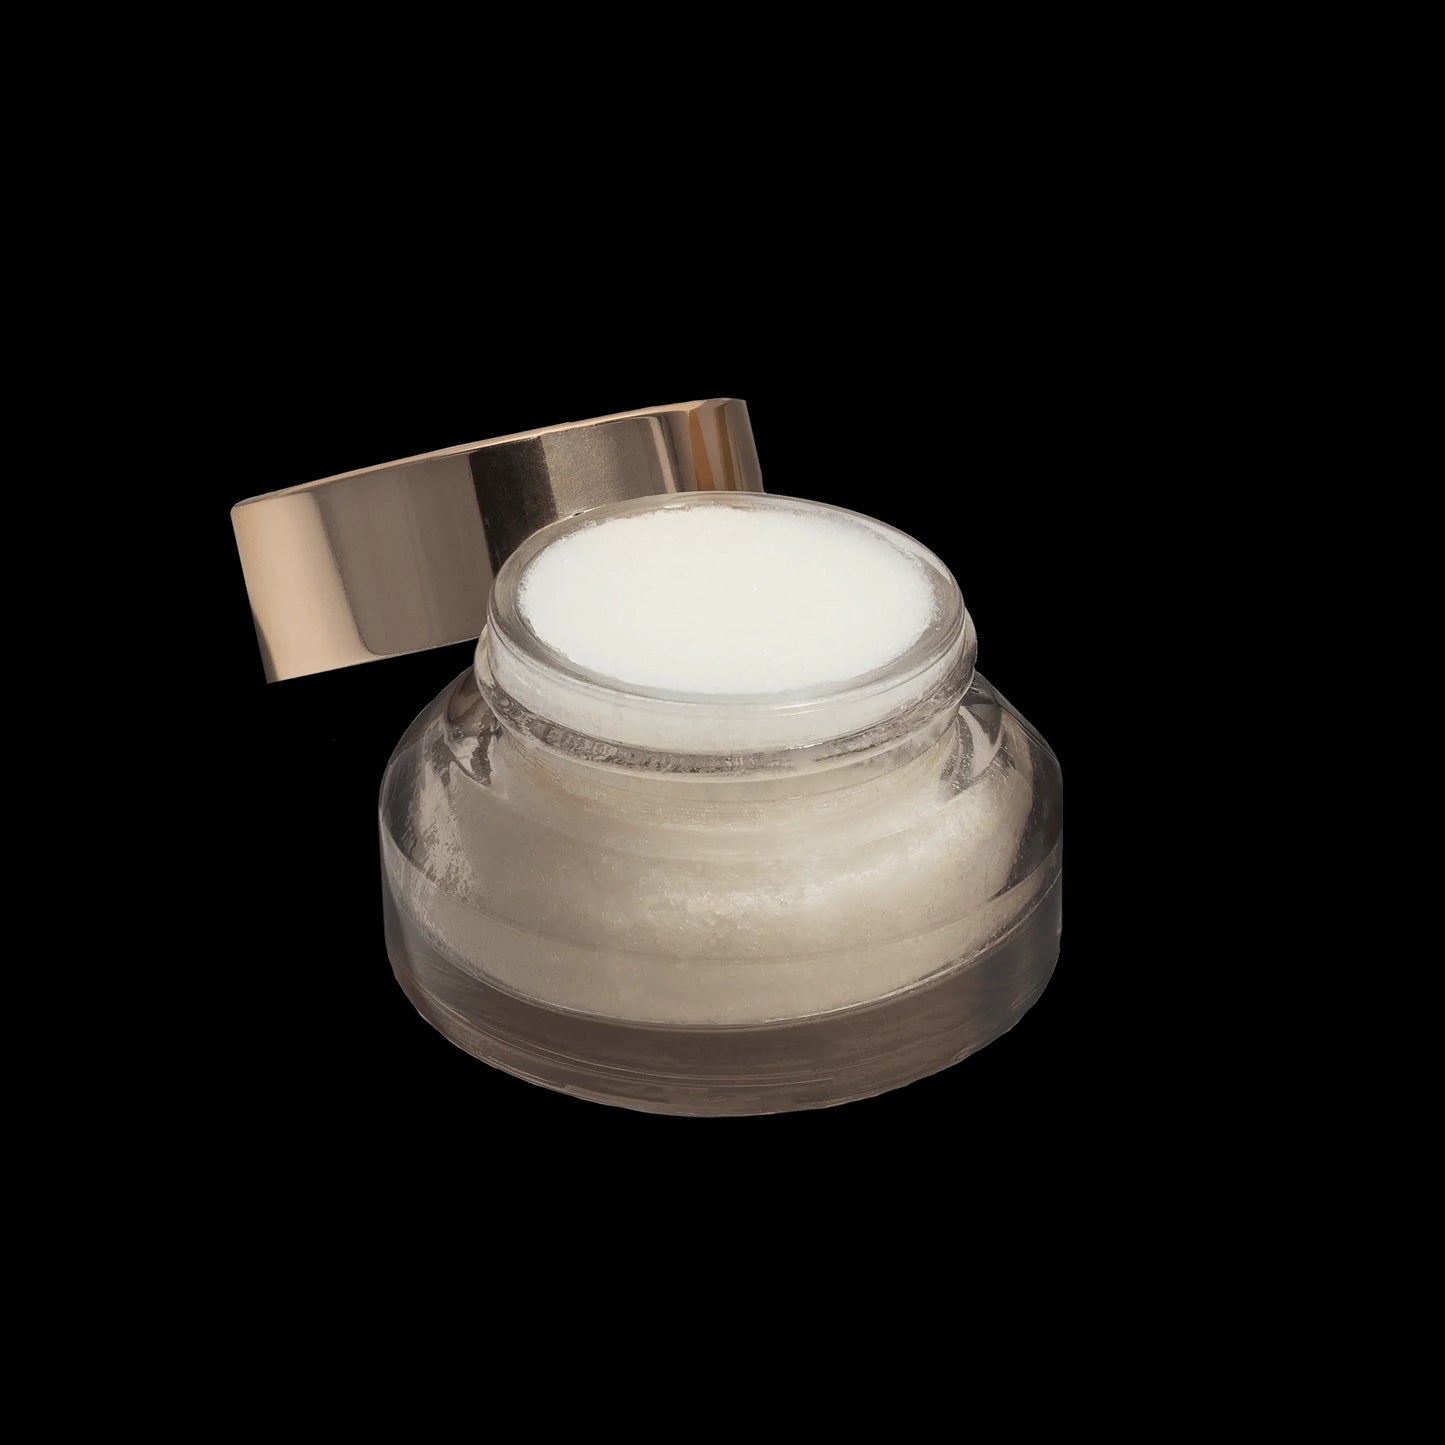 Load image into Gallery viewer, Poppy &amp;amp; Pout Island Coconut Lip Scrub
